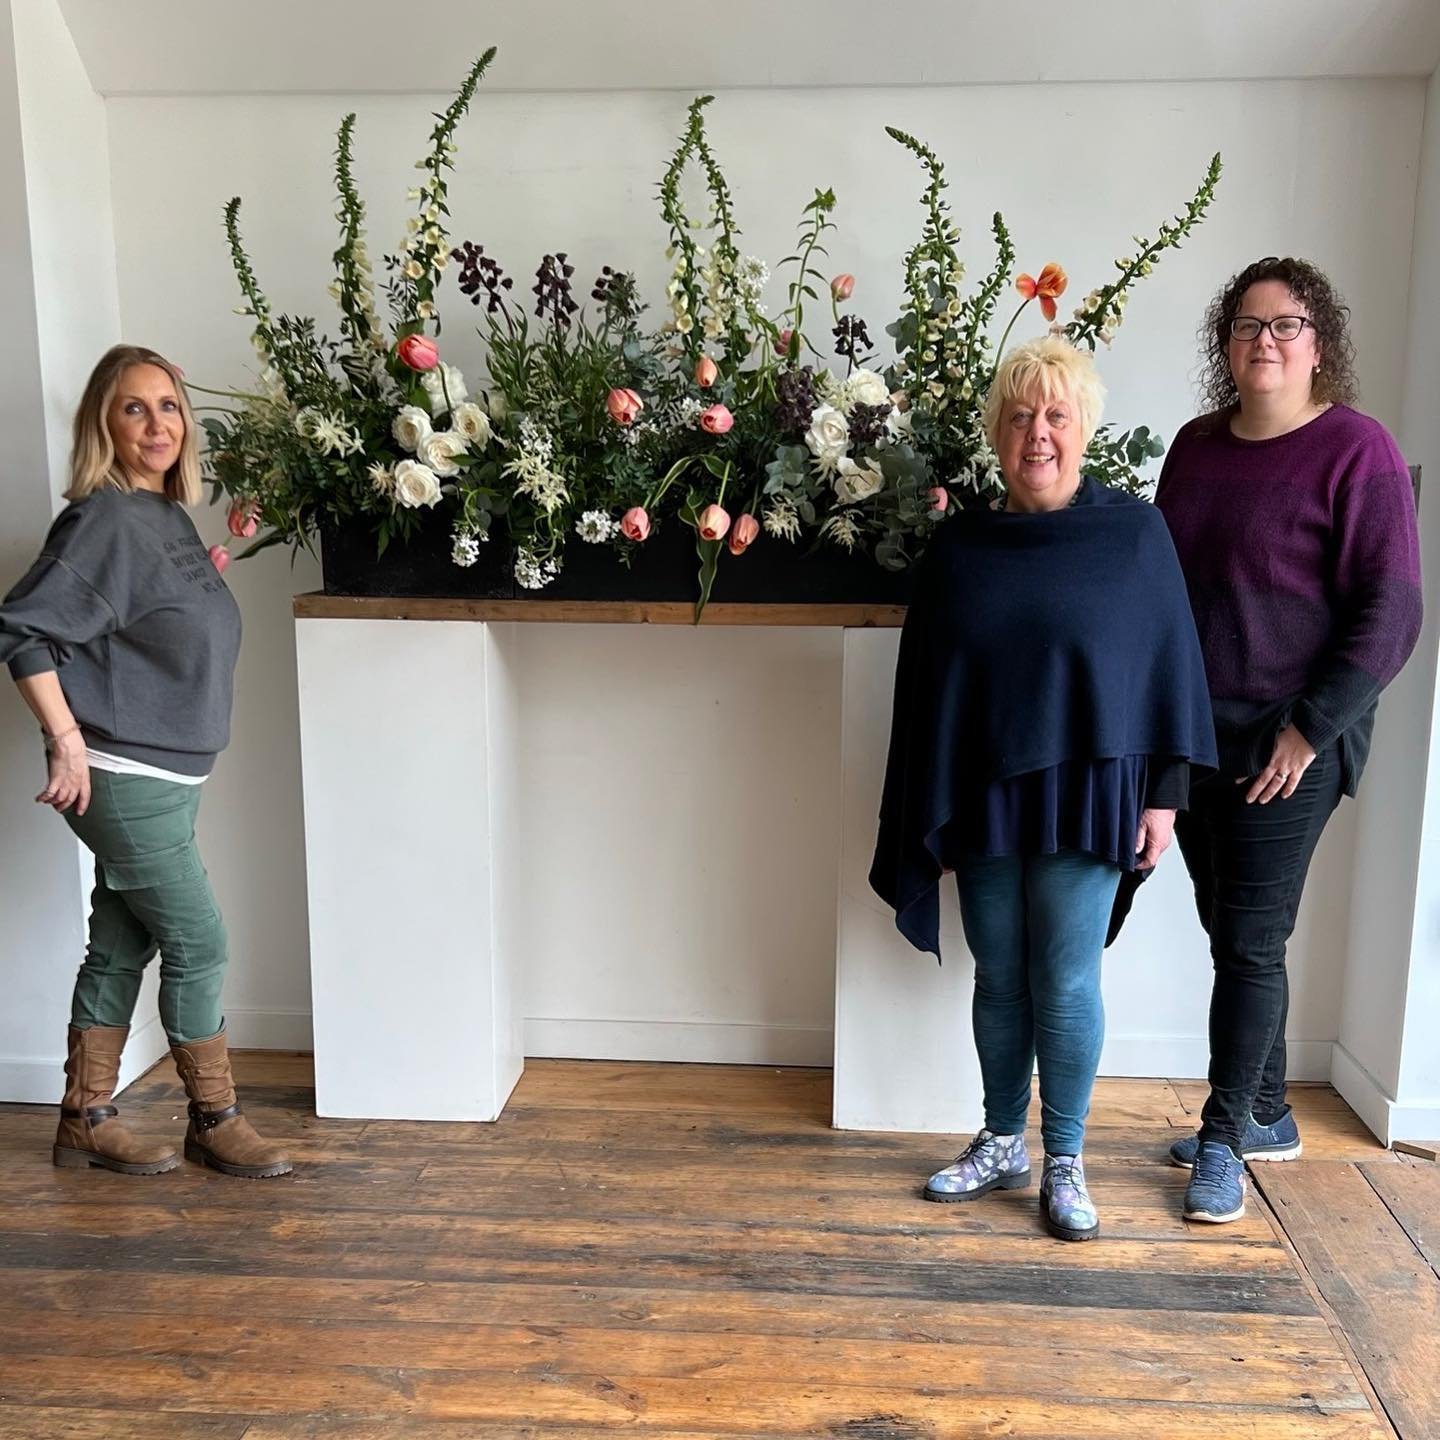 T E S T I M O N I A L  T U E S D A Y

Don&rsquo;t take our word for it. Hear what the students have to say about our courses, us, and our flower school&hellip;

&ldquo;Thank you both for an amazing 2 days !! 

 
I feel I have learned so much and will